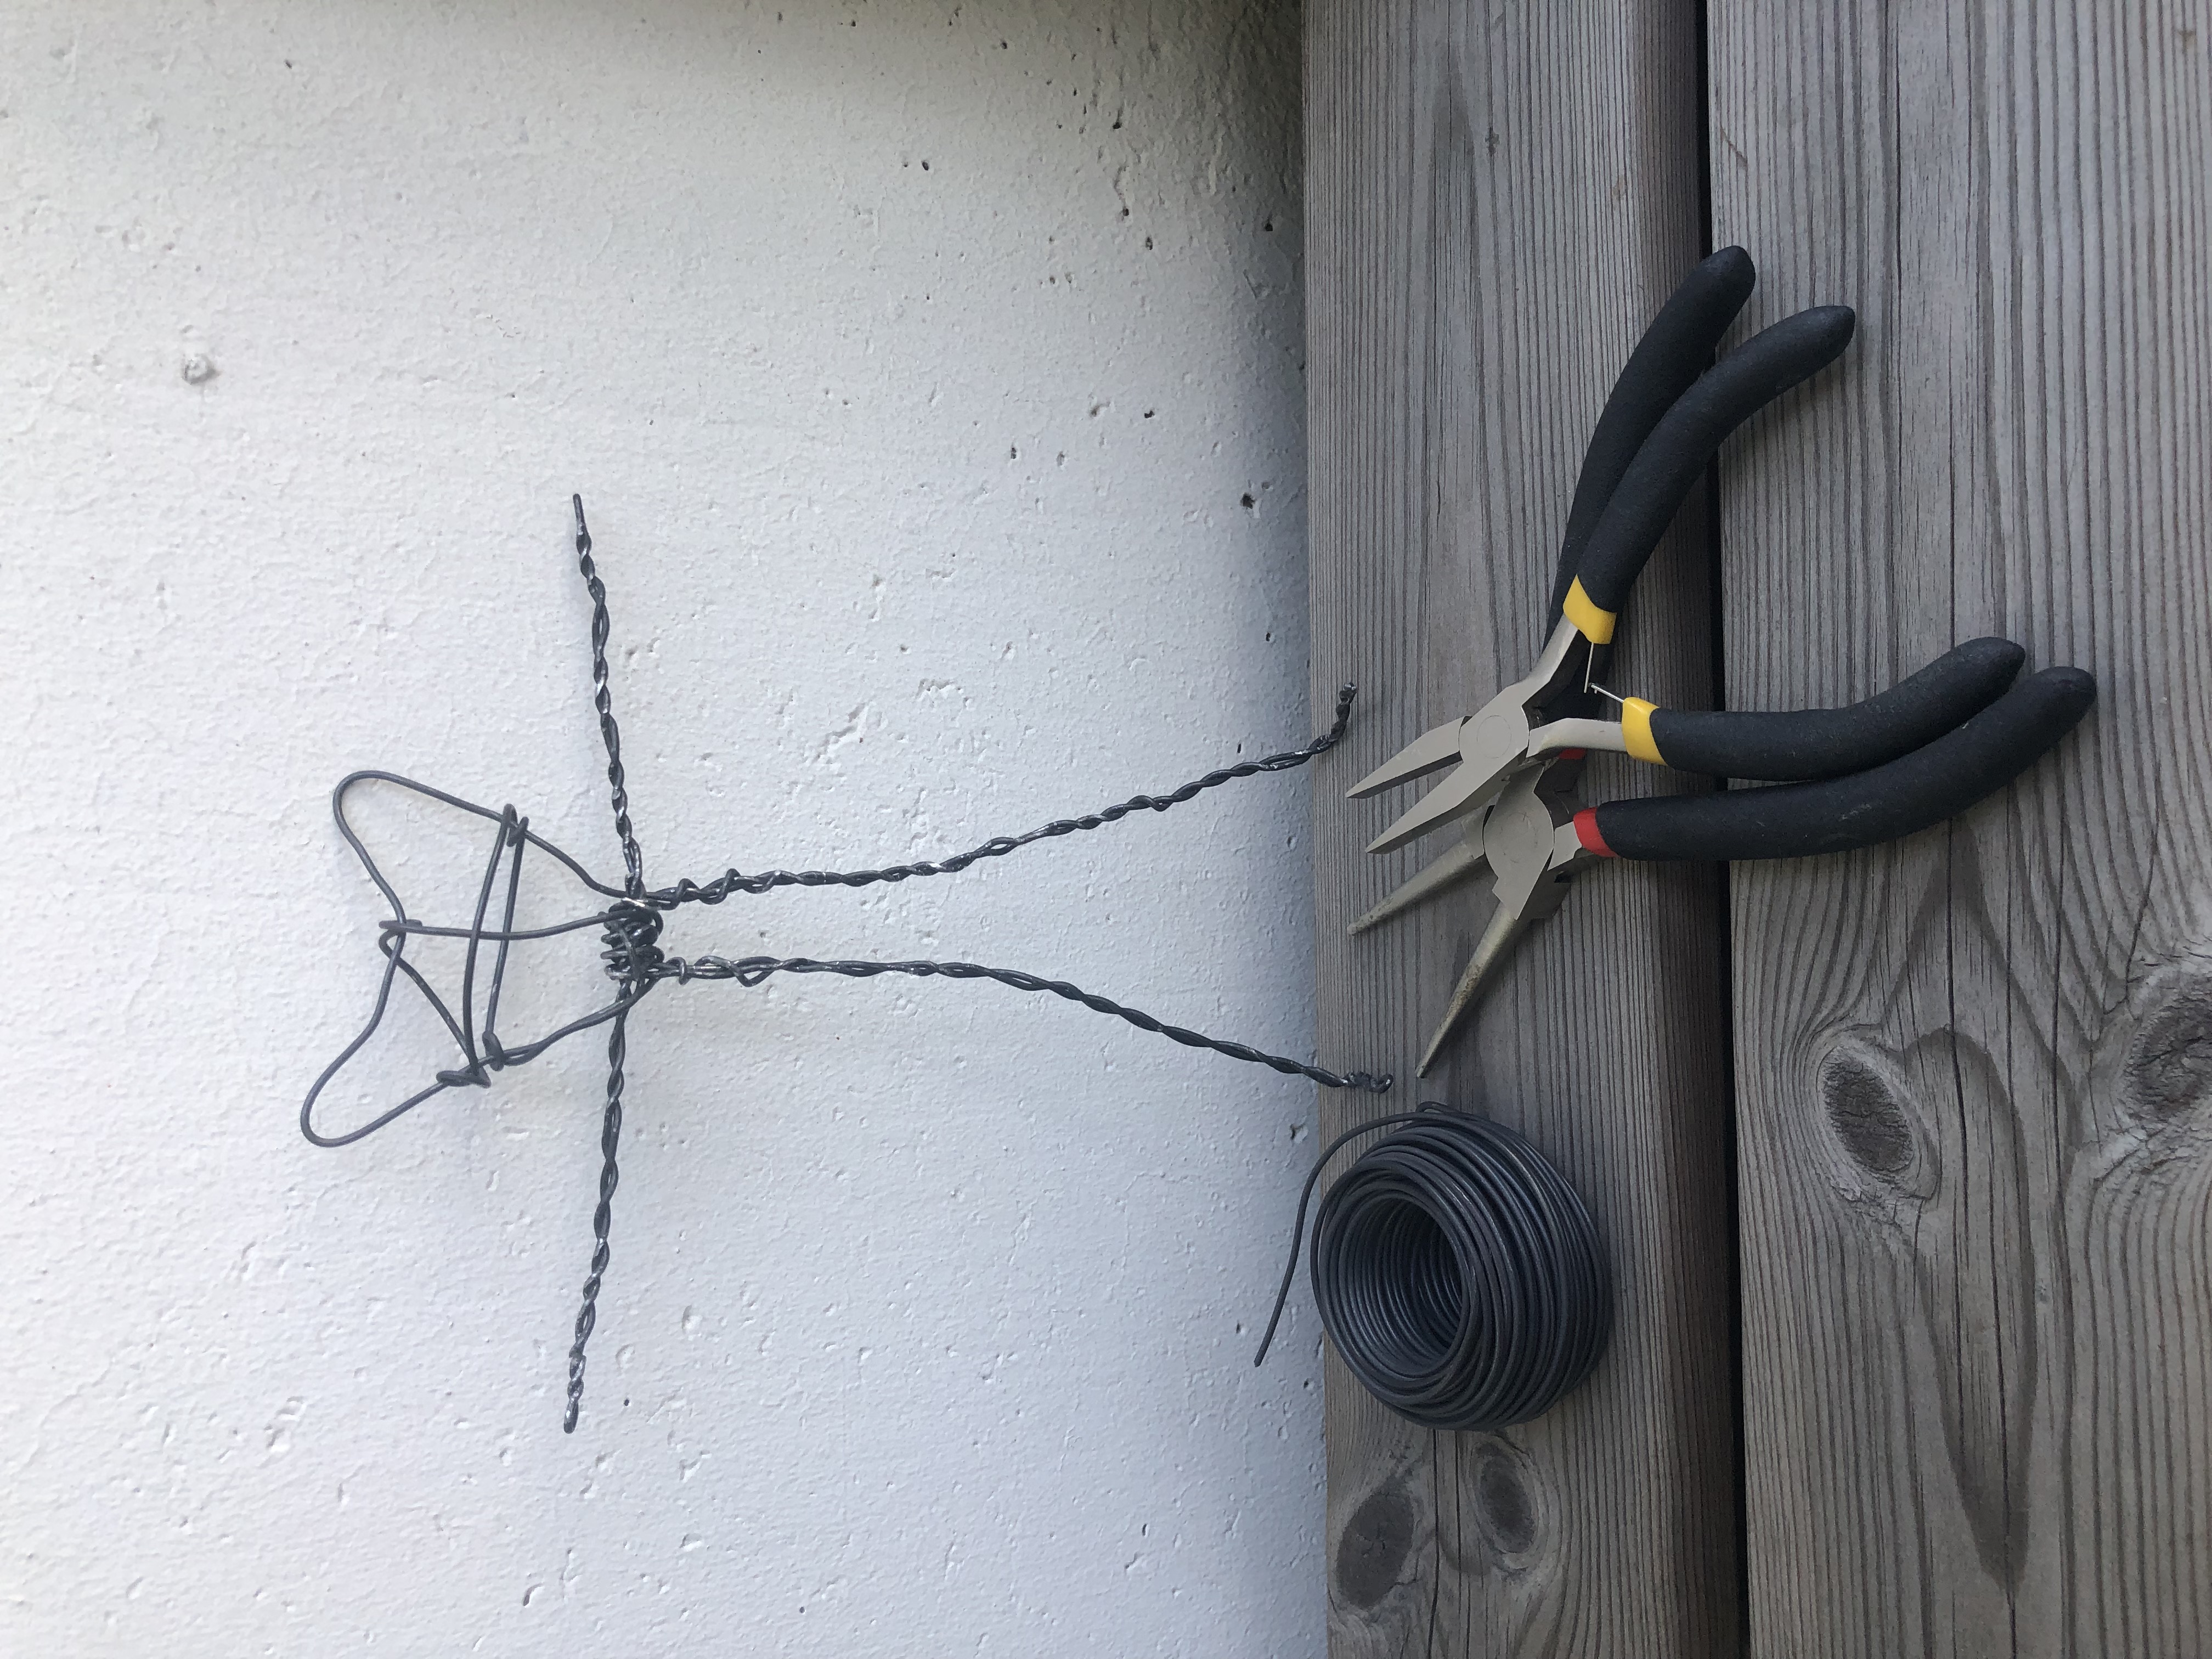 A wire skeleton of a Yarny doll and some tools